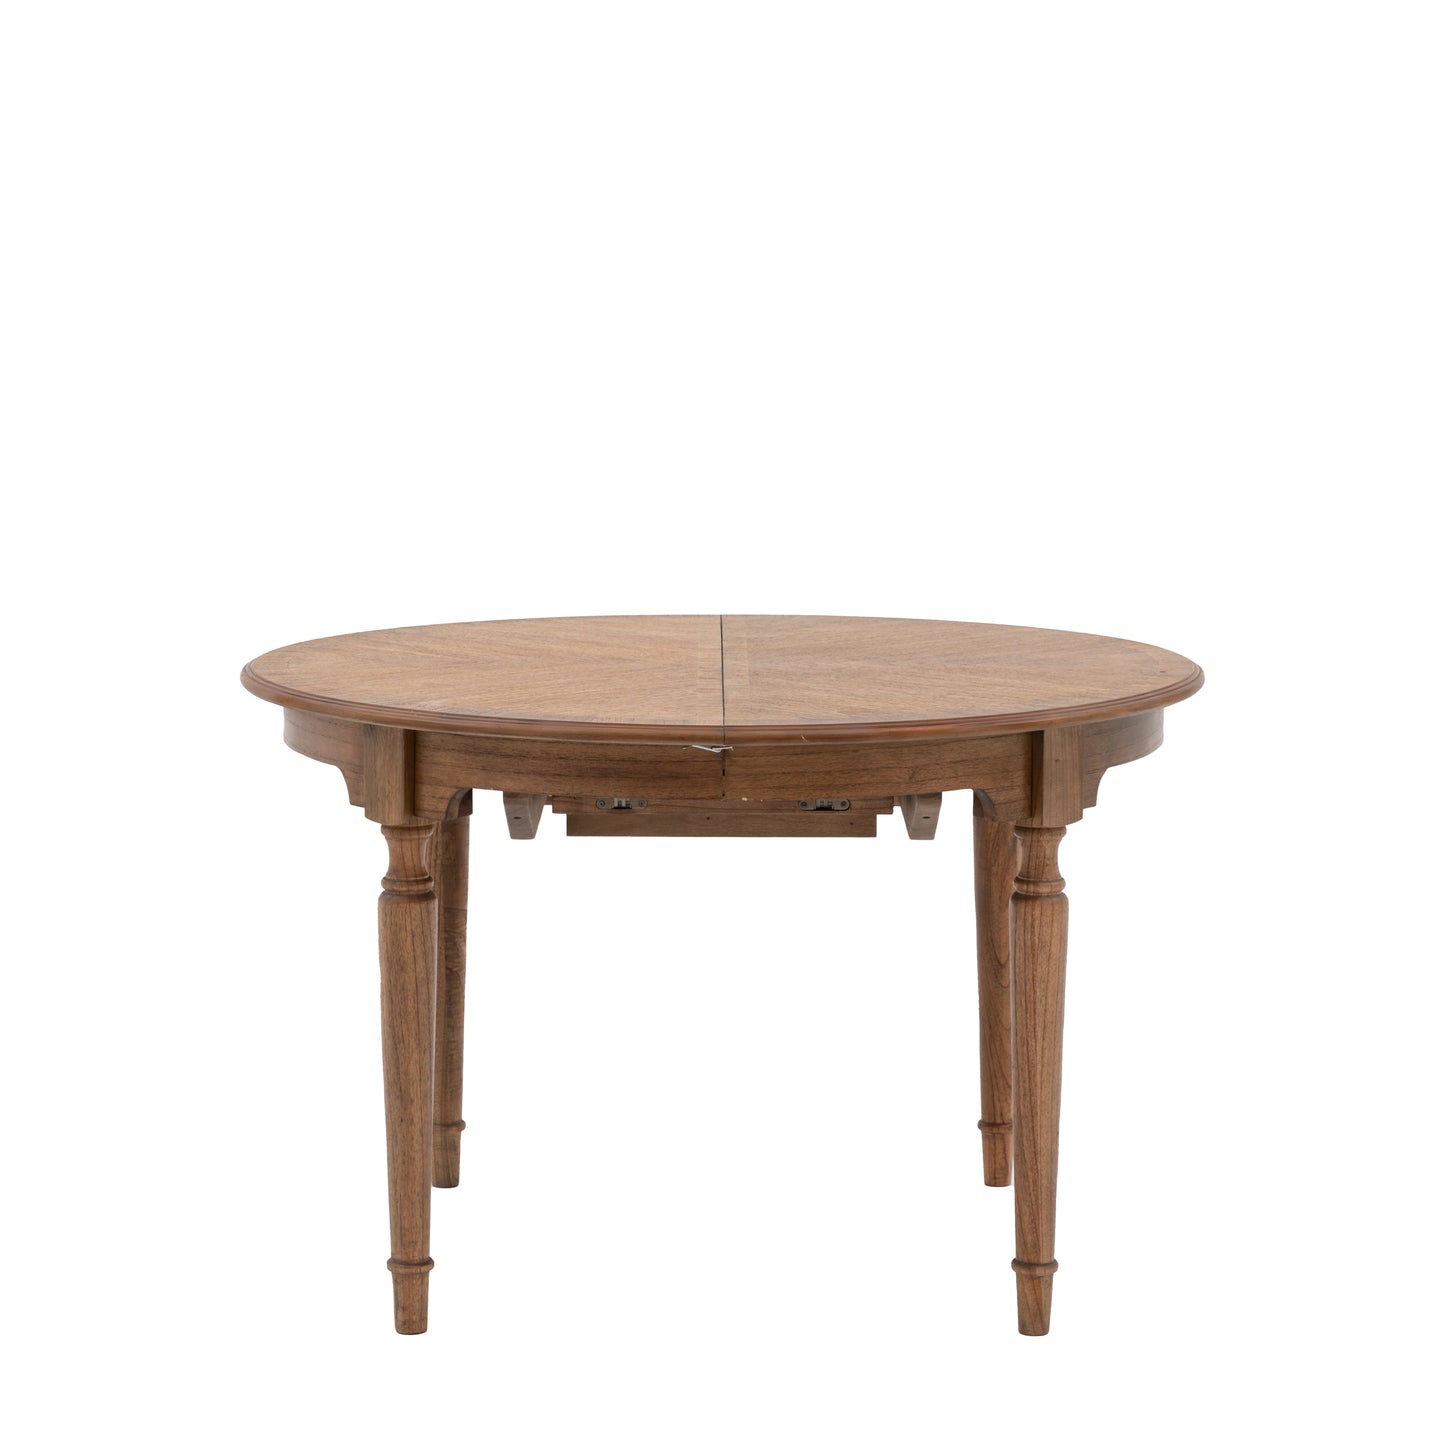 A Sweaton Extending Round Table with wooden top for home furniture and interior decor.